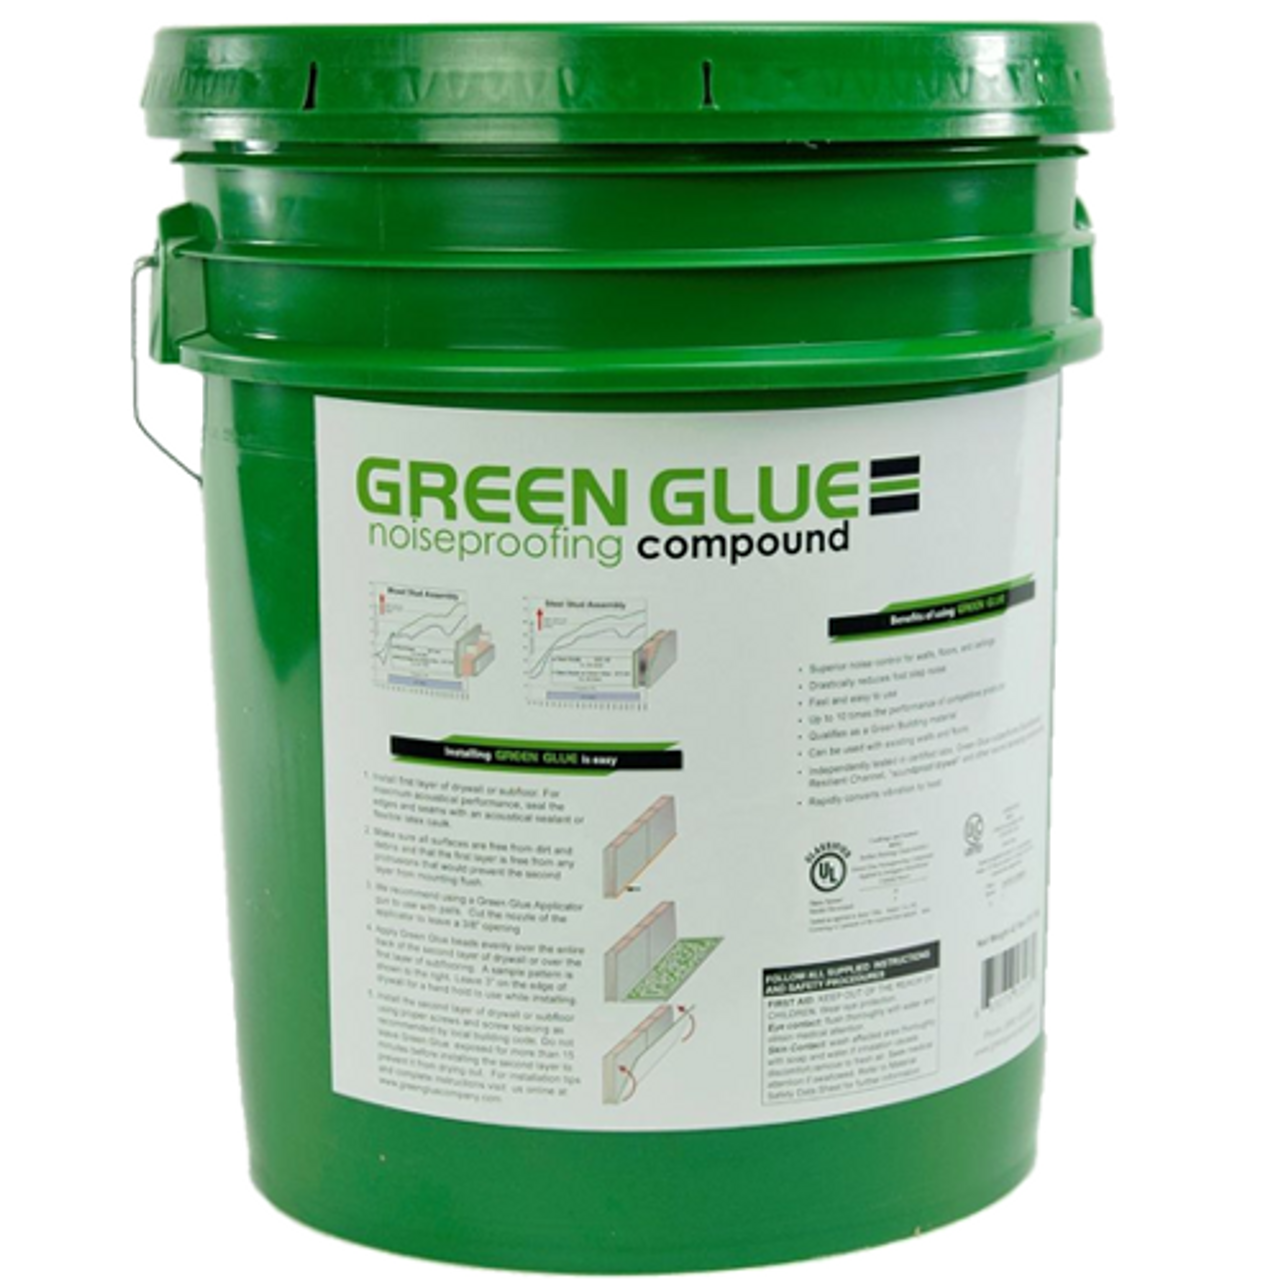 Green Glue Sealant vs Compound in Tubes and Pails - Buy Insulation Products